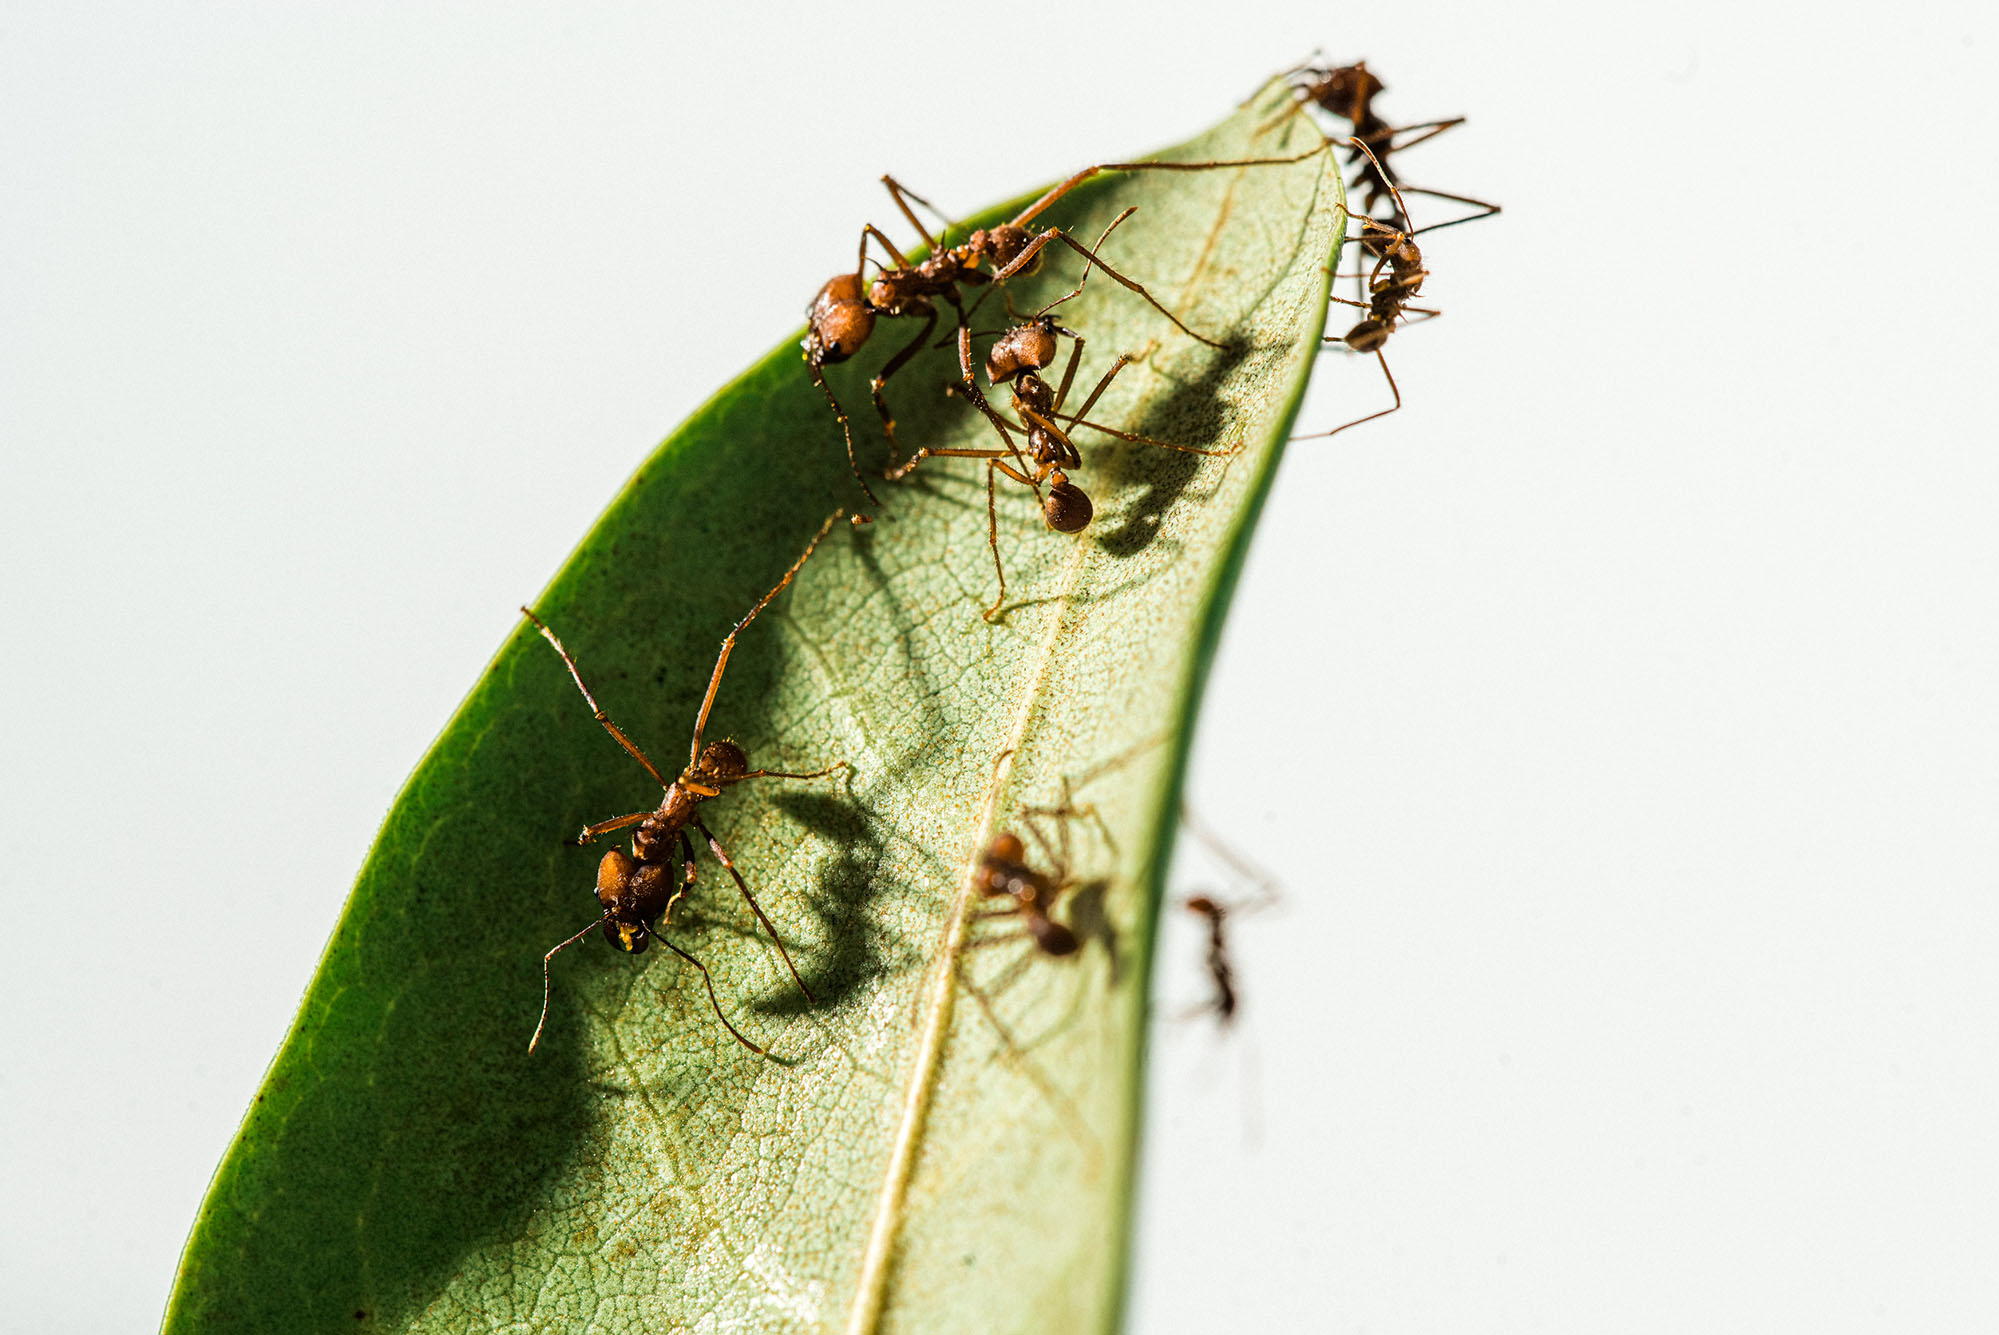 Photo: Zoomed in macro shot of brown ants on a green leaf in front of a bright white background.